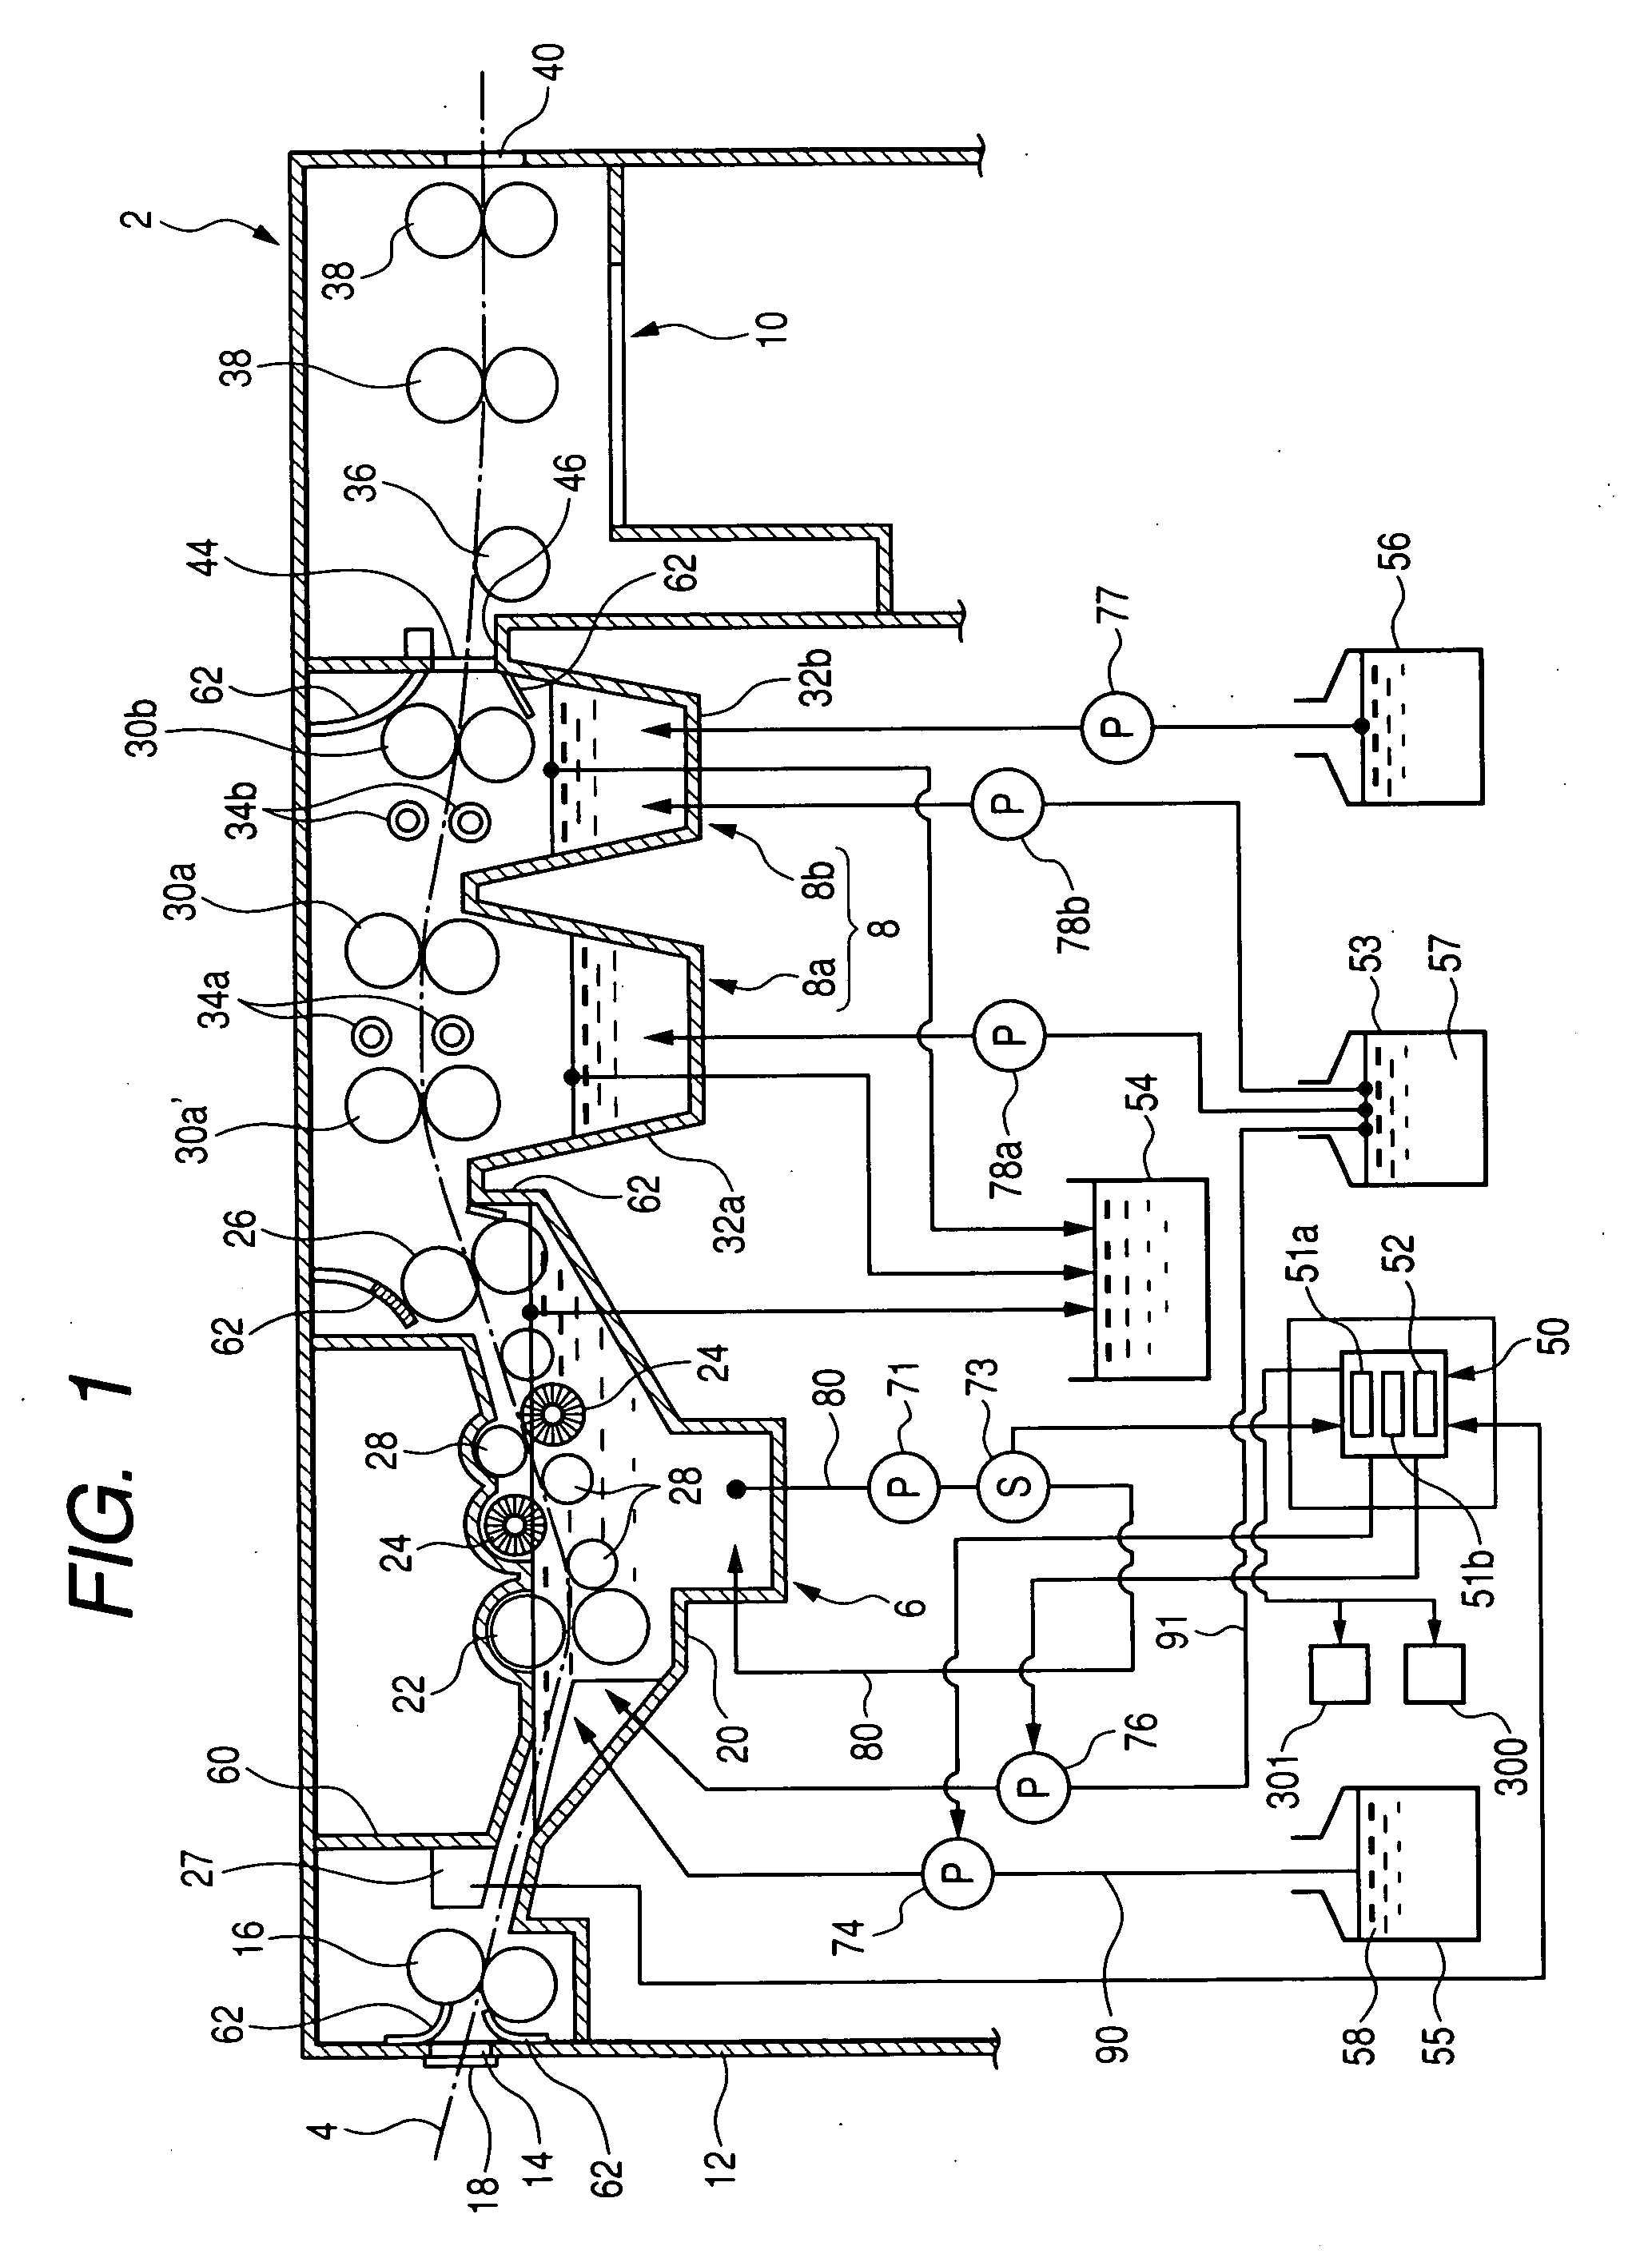 Method for controlling development in automatic developing machine for photosensitive lithographic printing plate precursor and automatic developing machine therefor